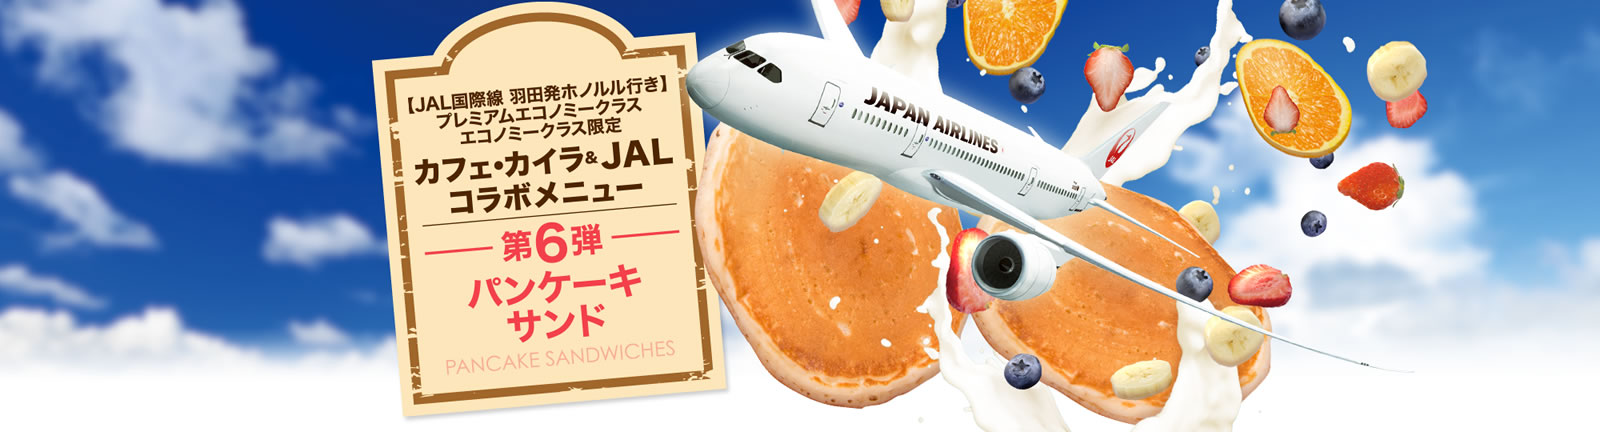 JAL日本航空に乗ってカフェ・カイラを味わおう!!